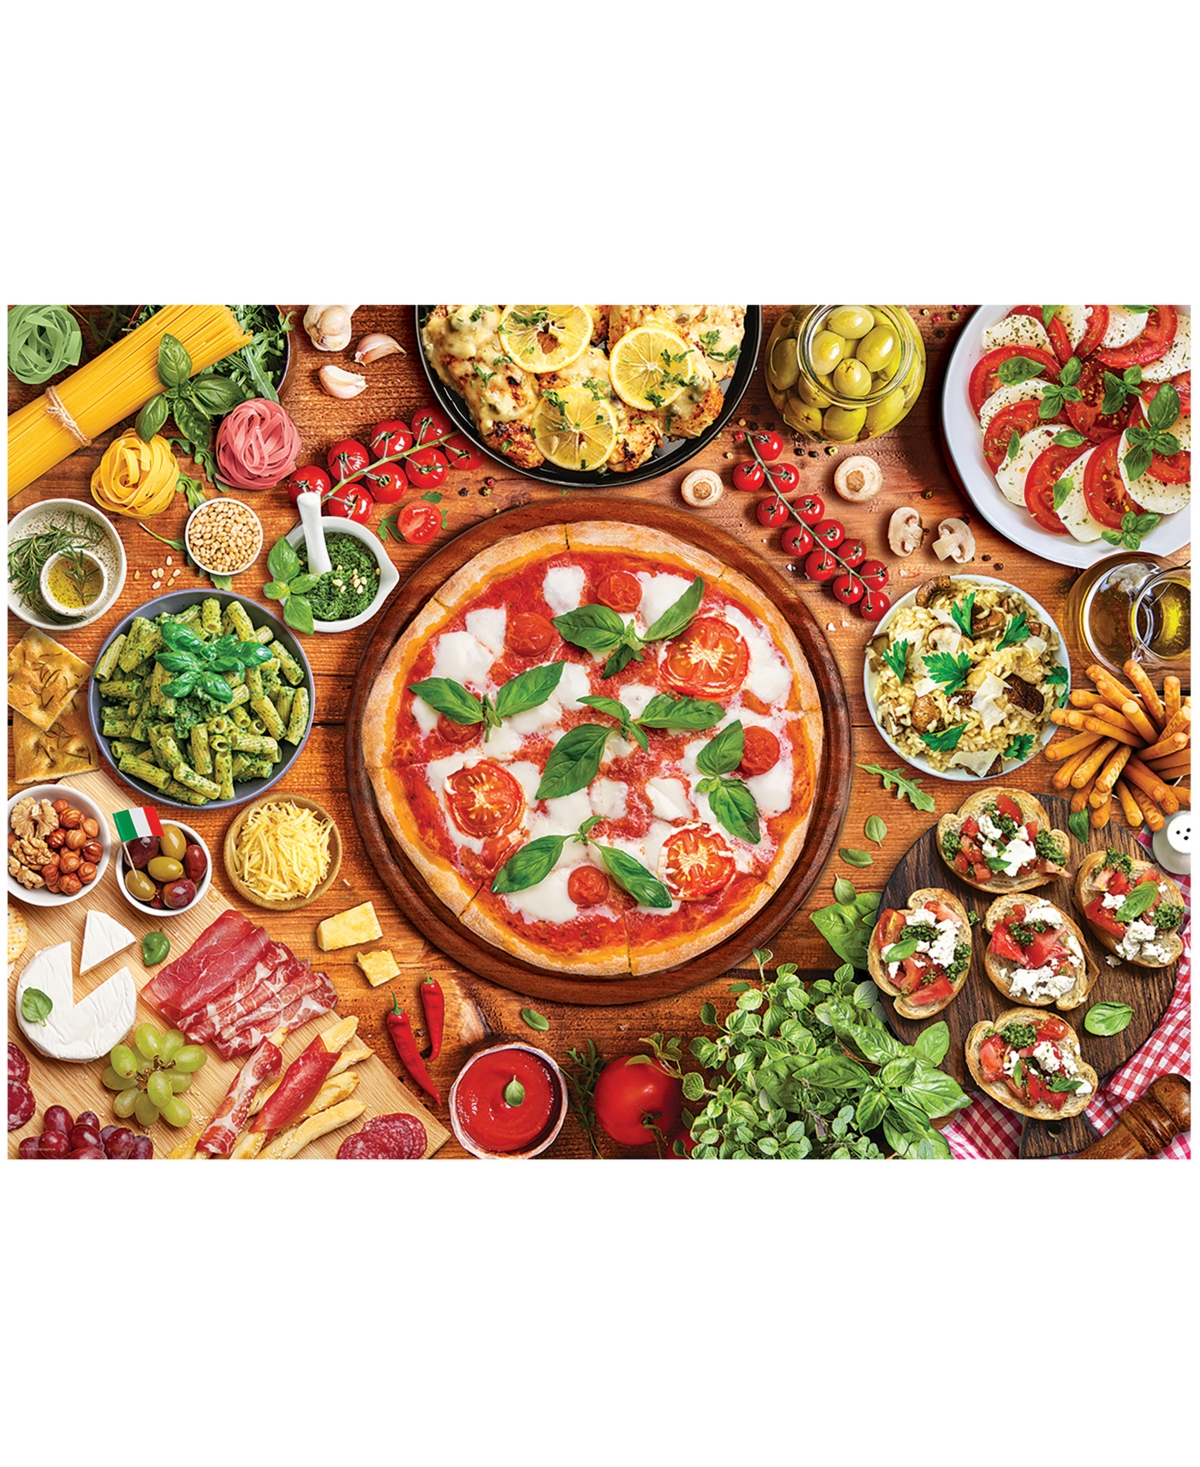 University Games Kids' Eurographics Incorporated Flavors Of The World Italian Table Jigsaw Puzzle, 1000 Pieces In No Color